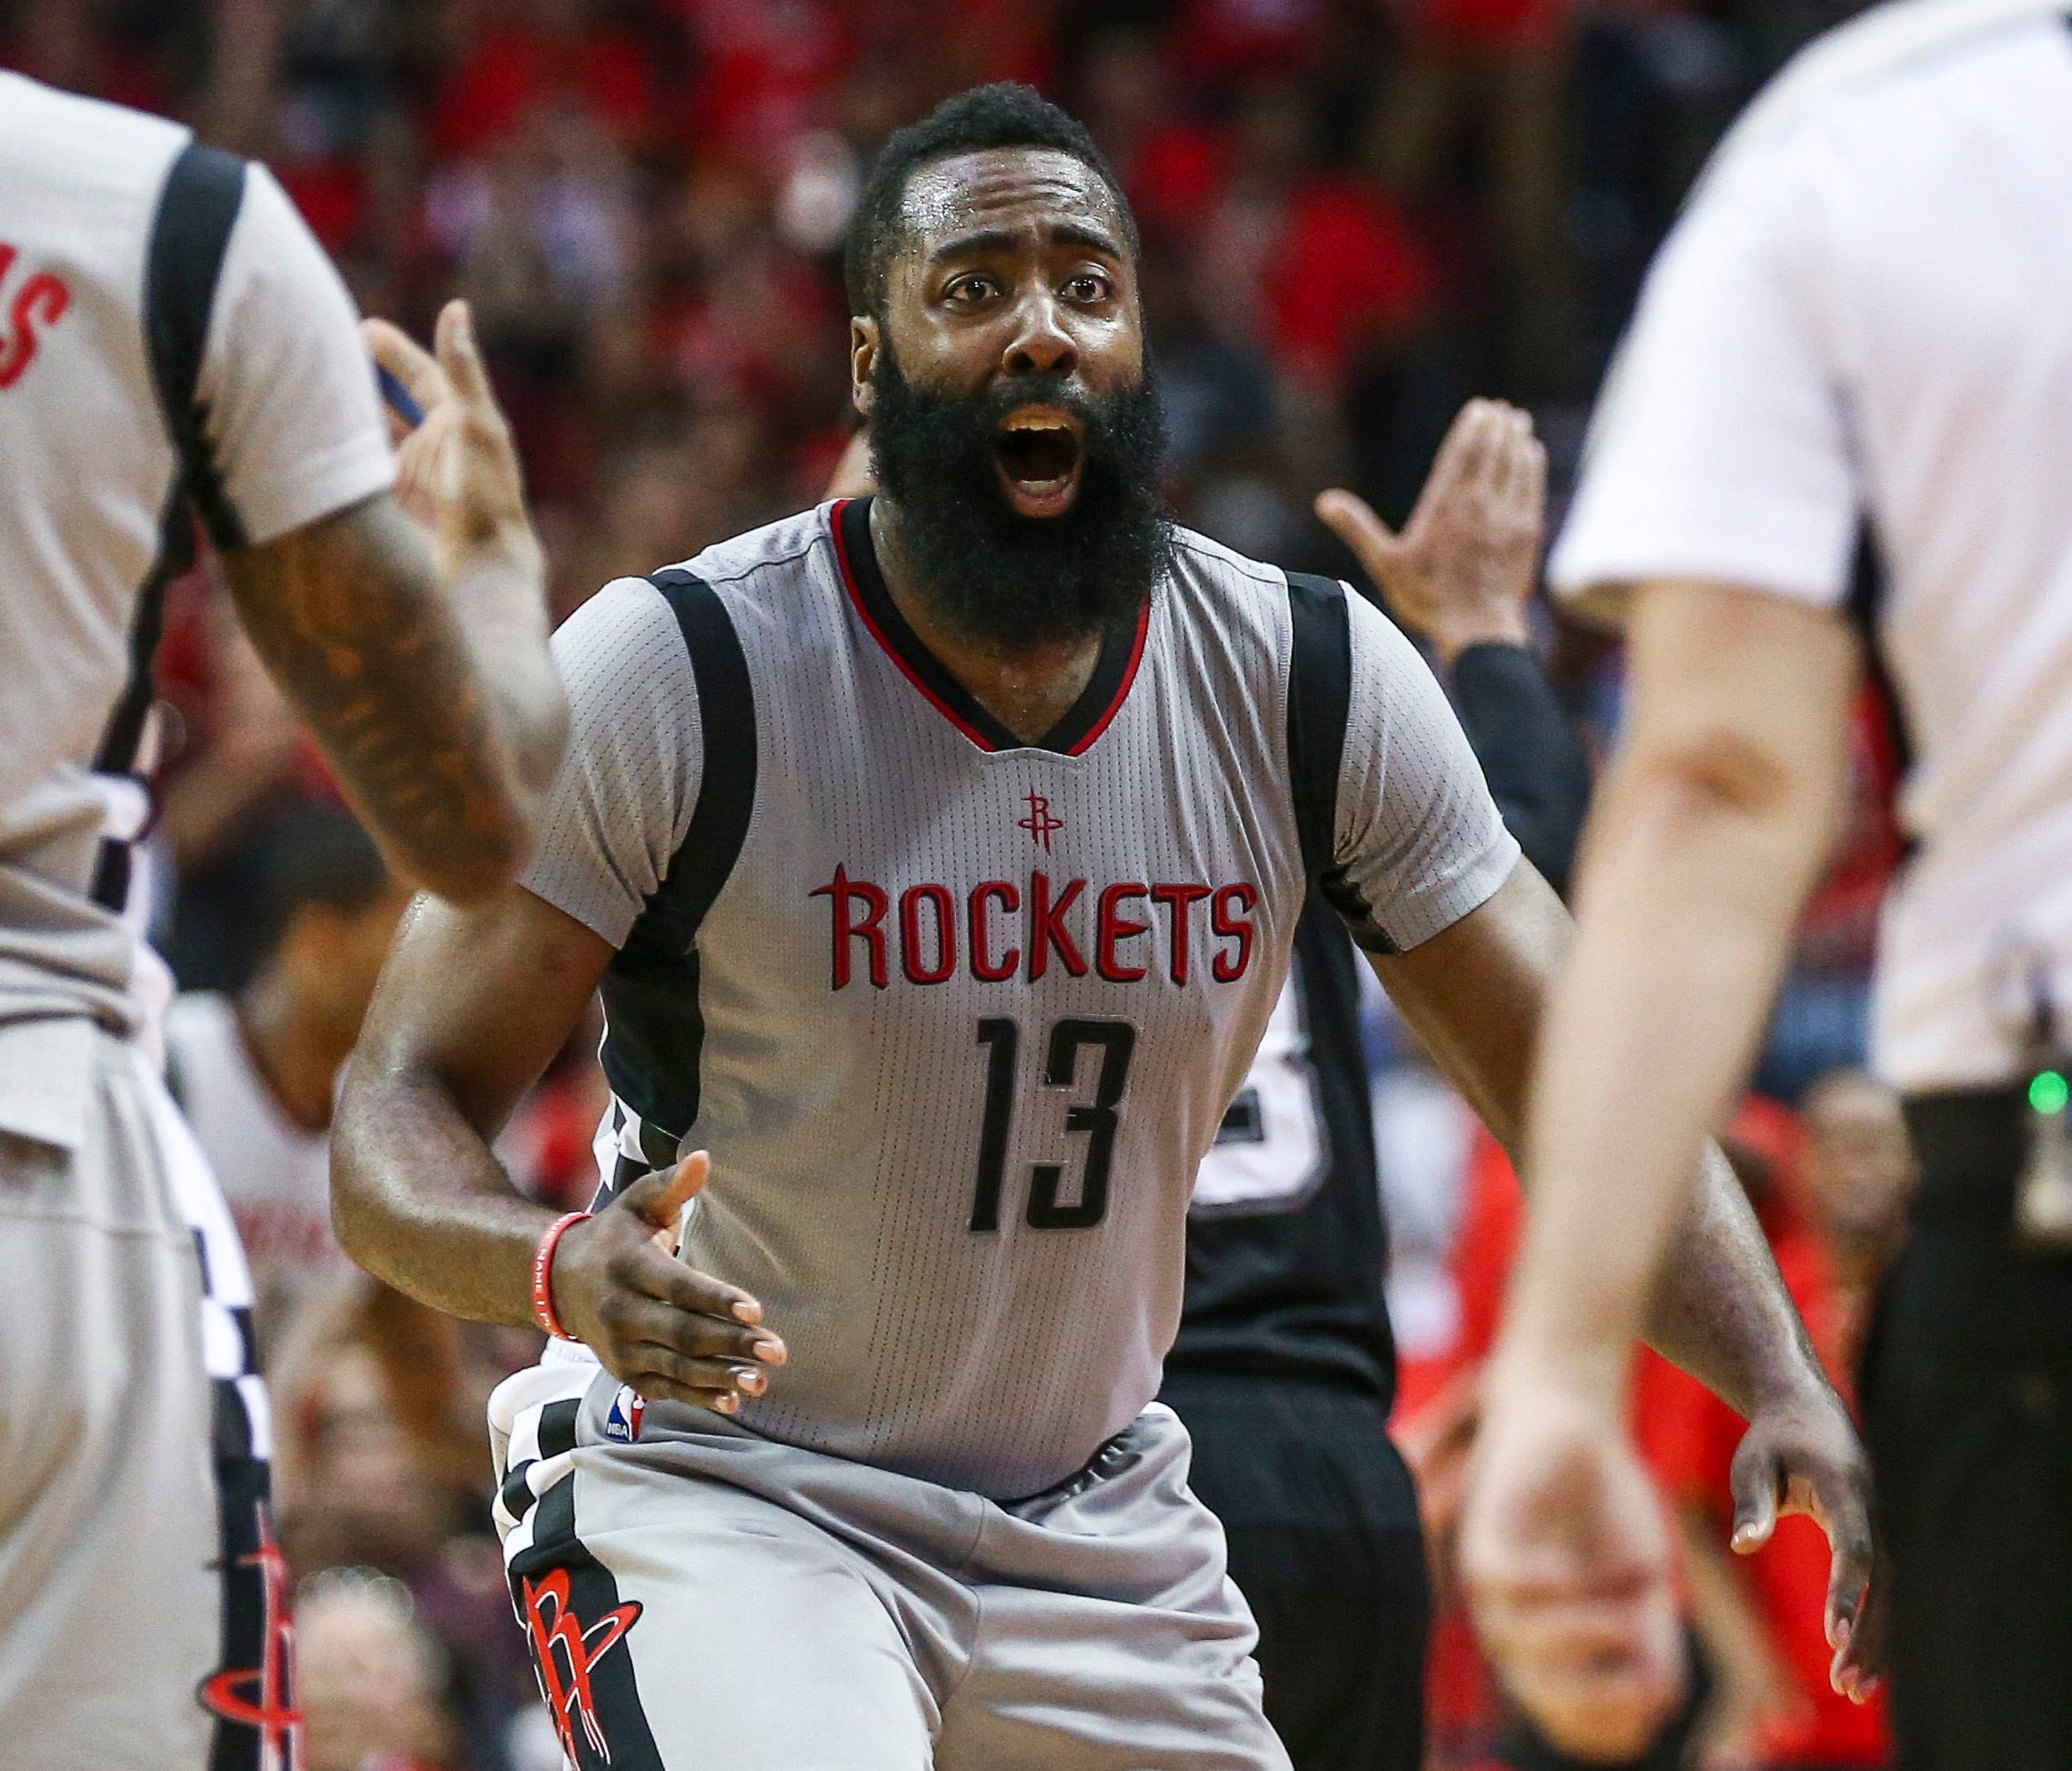 James Harden scored just 10 points on 2-for-11 shooting in the Rockets' season-ending loss.